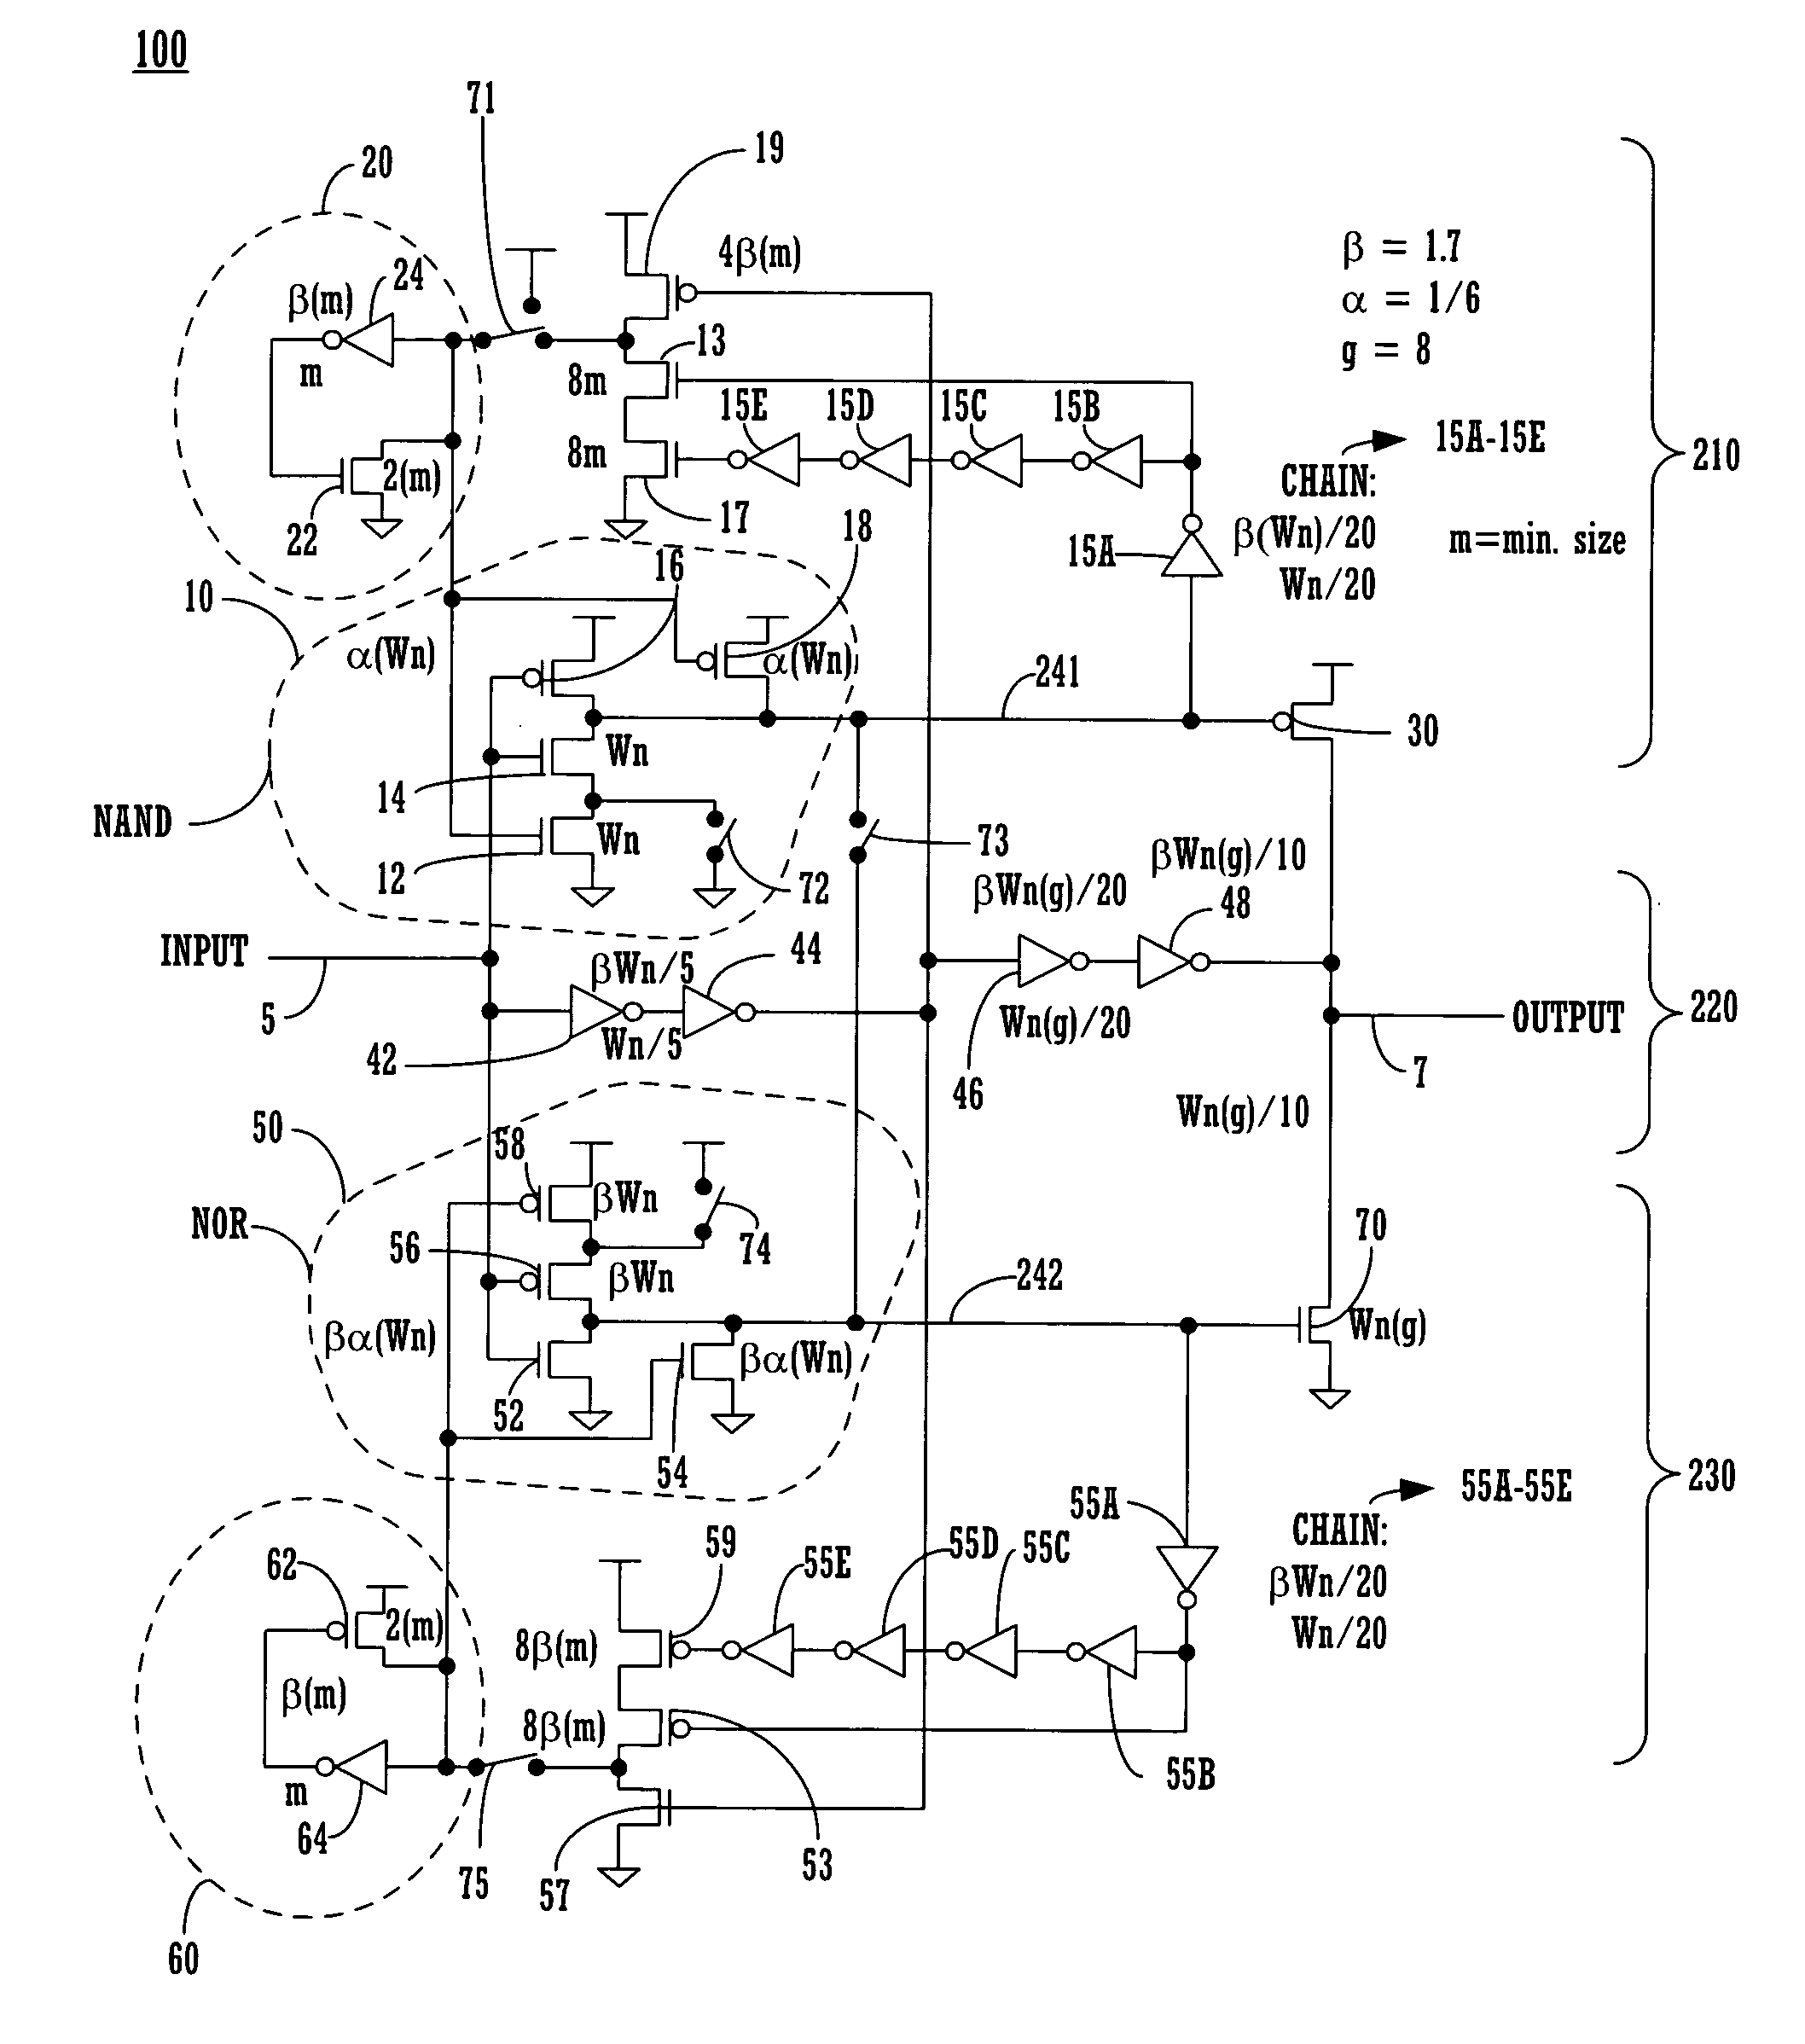 Repeater circuit with high performance repeater mode and normal repeater mode, wherein high performance repeater mode has fast reset capability